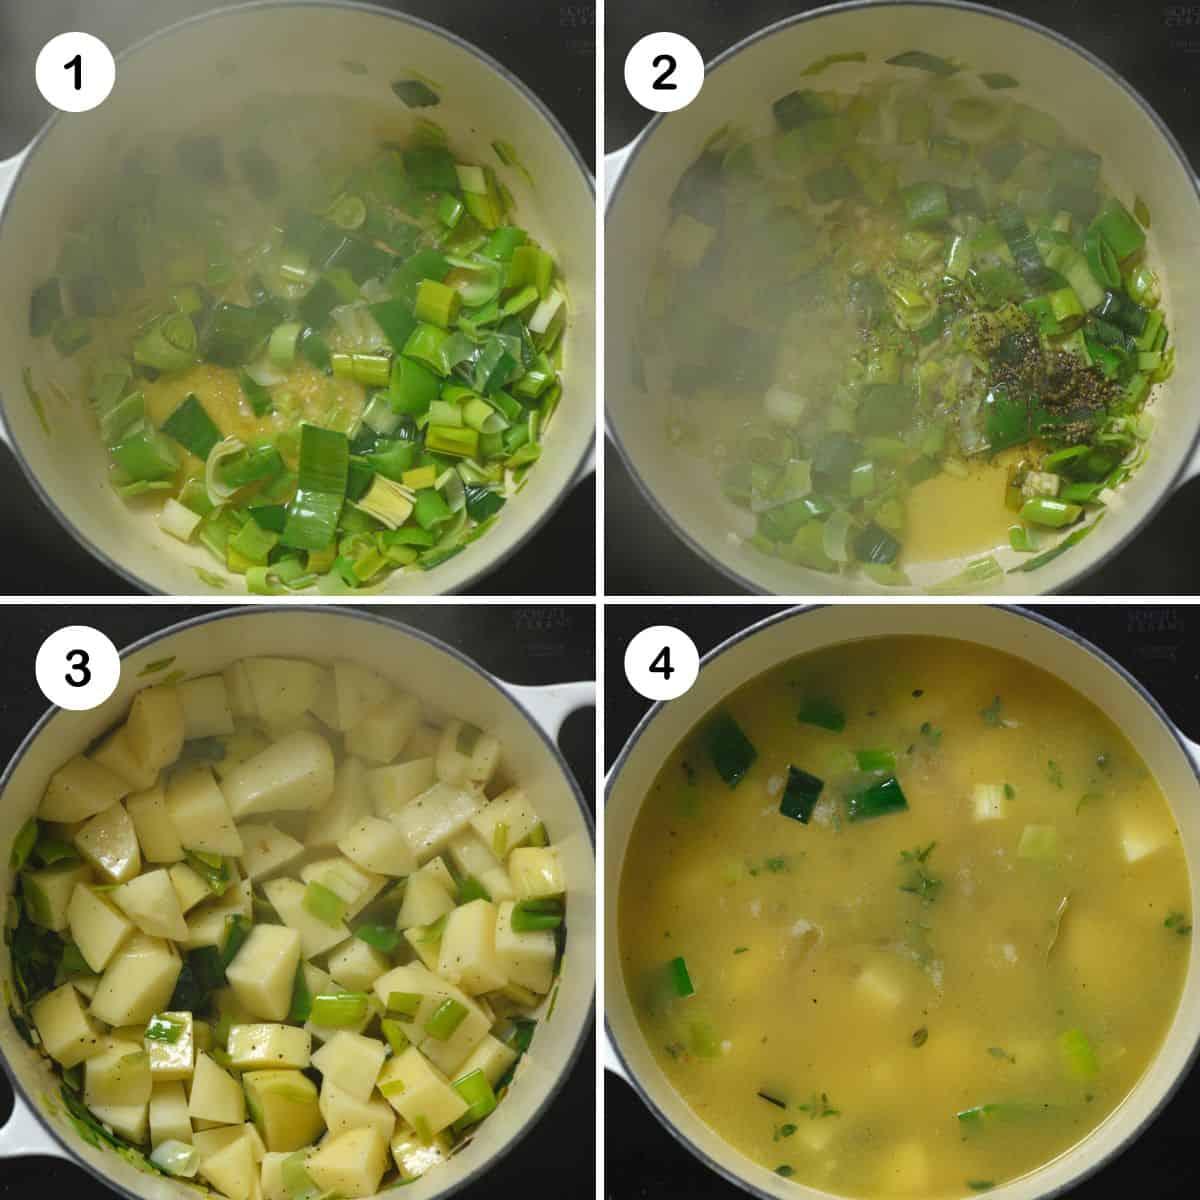 Steps for cooking leek and potatoes